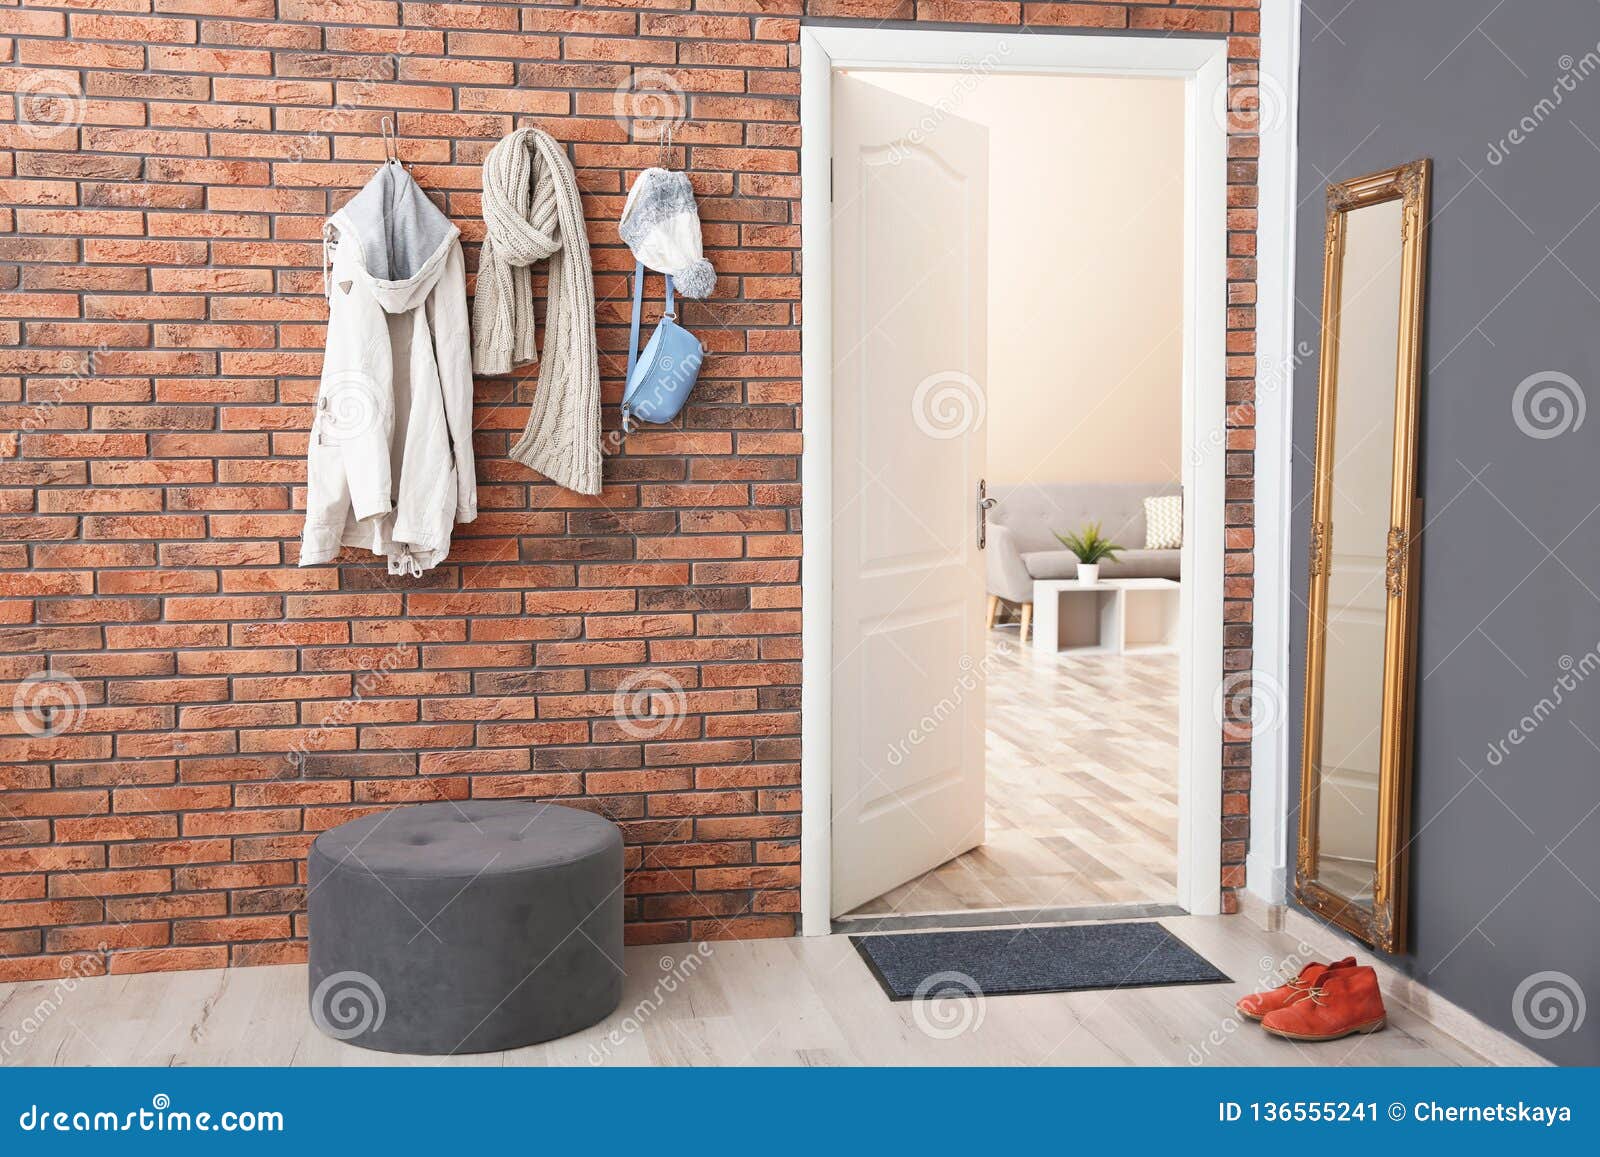 Stylish Hallway Interior With Door And Clothes Hanging Stock